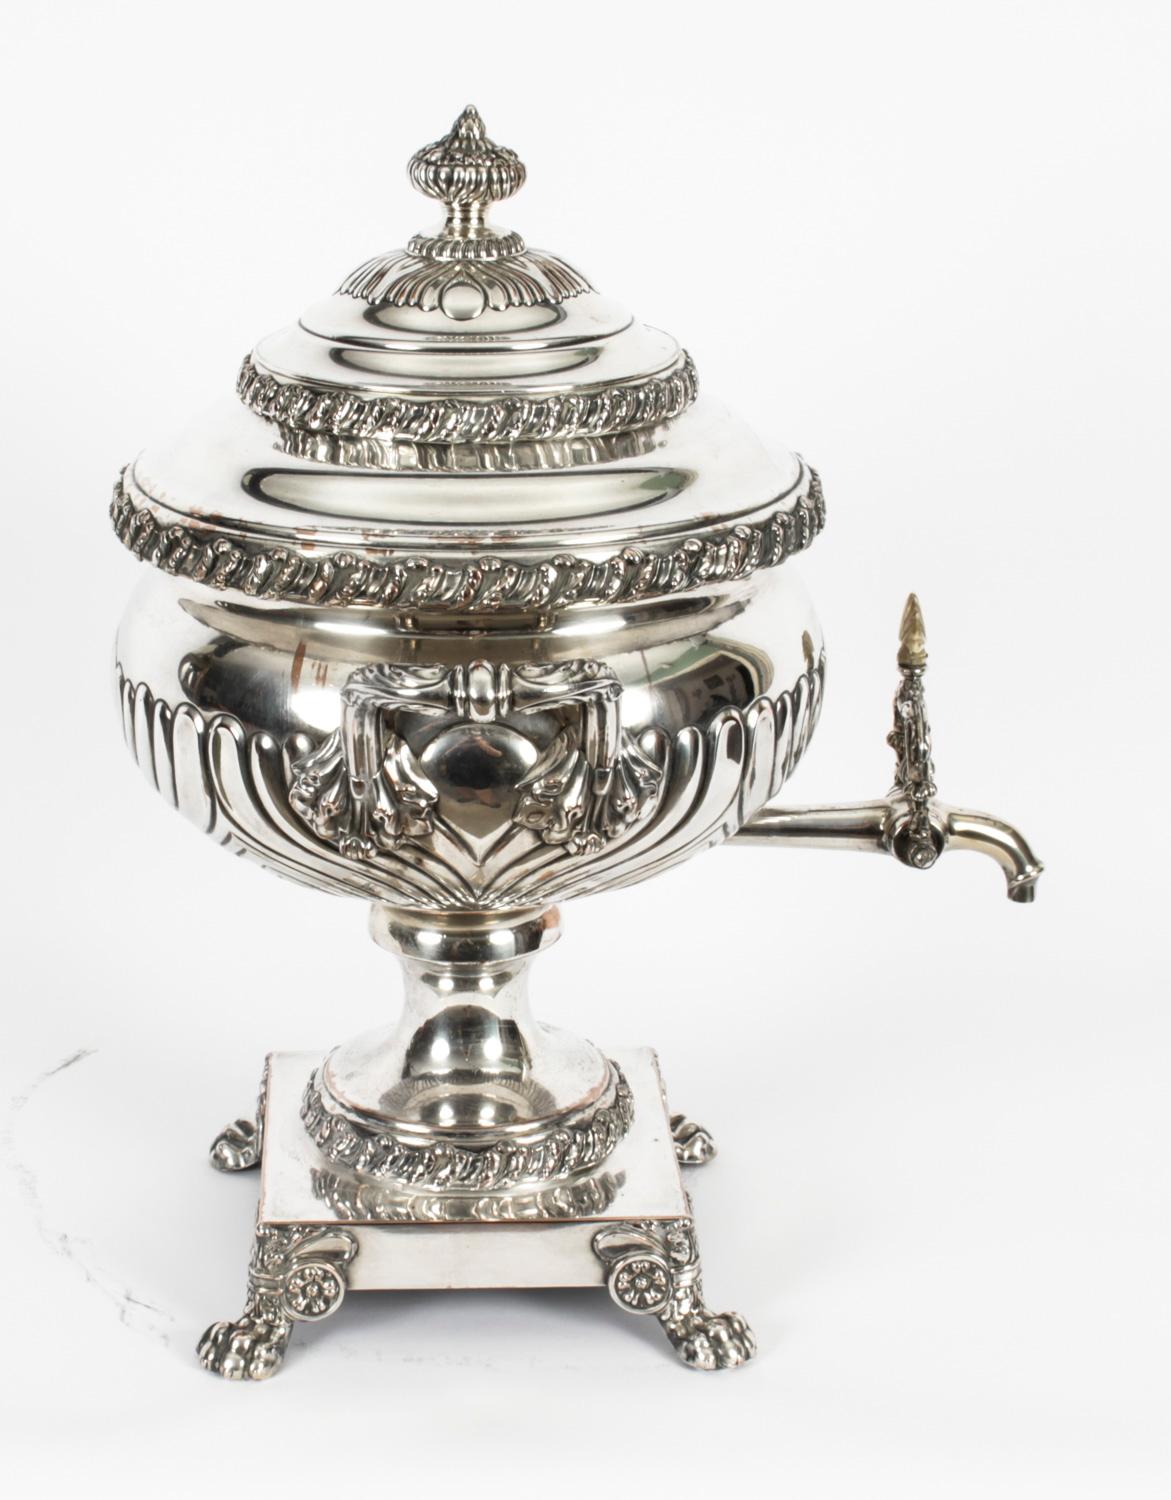 This is a wonderful antique Regency Old Sheffield silver plated tea urn, Circa 1820 in date.

This handsome antique Old Sheffield samovar has been silver plated on copper, with a reeded finial, foliate handles and a decorative tap. It has half